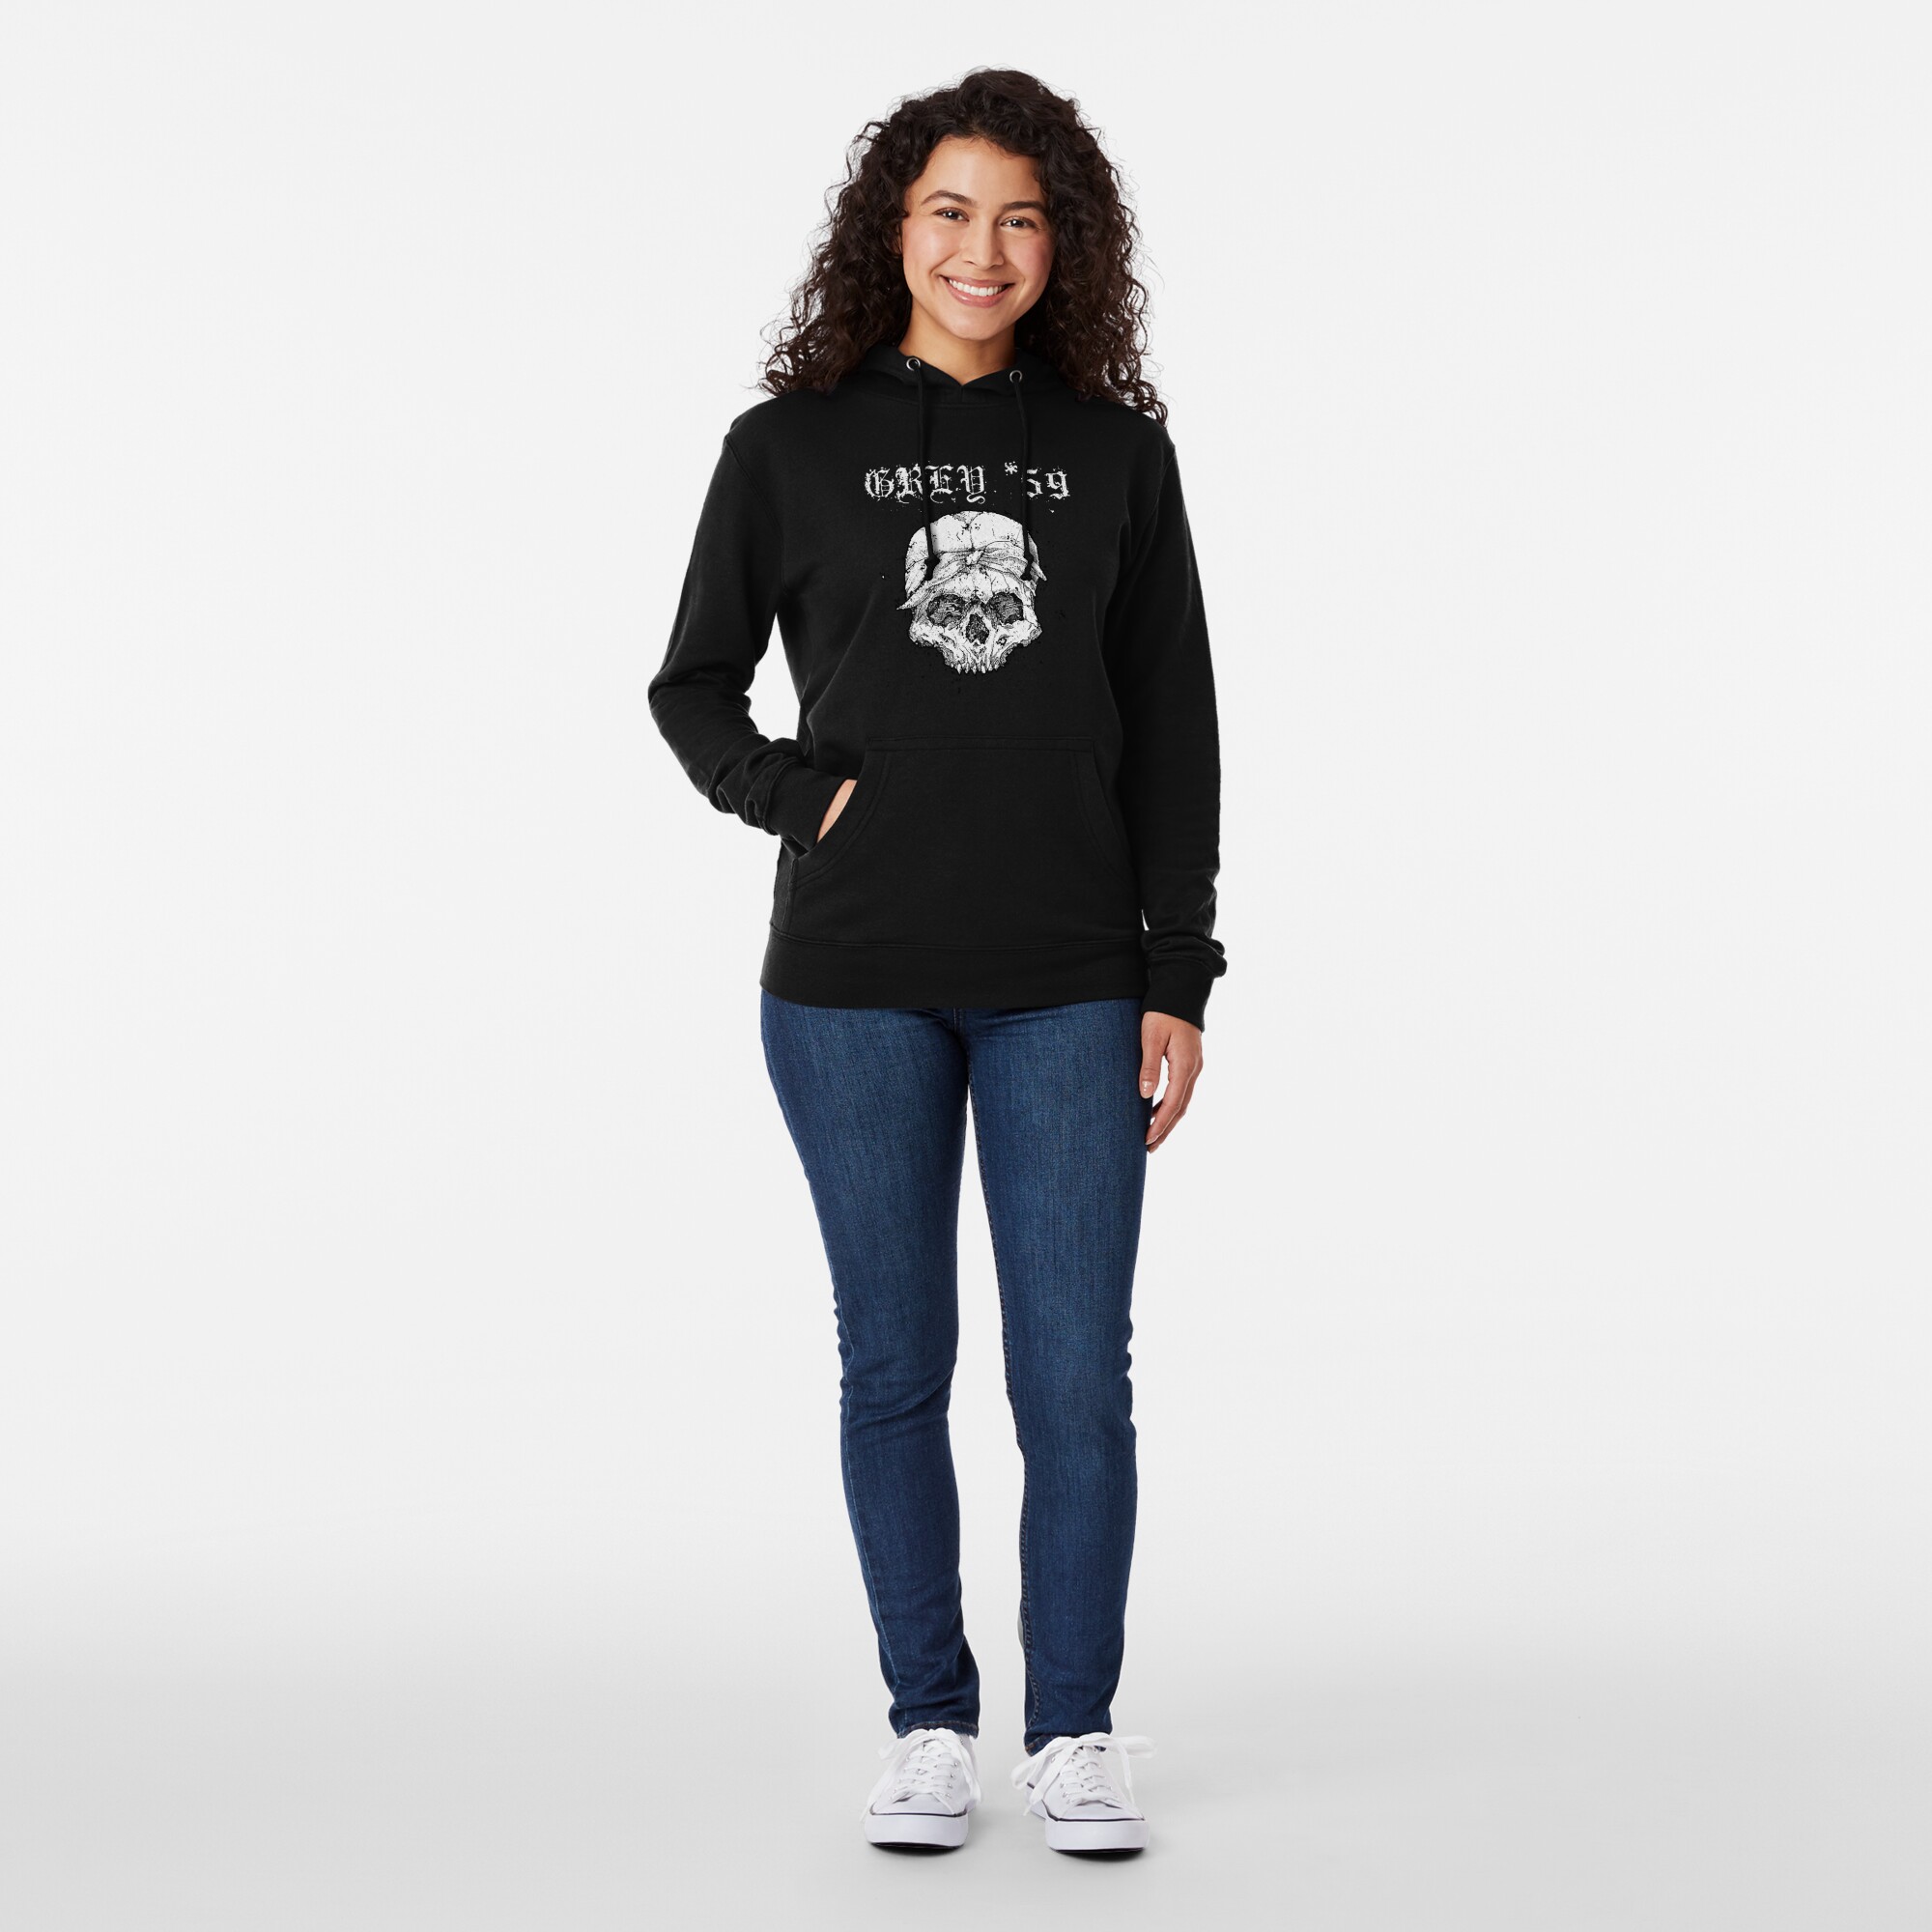 ssrcolightweight hoodiewomens10101001c5ca27c6frontsquarex2000 bgf8f8f8 12 - Suicideboys Shop